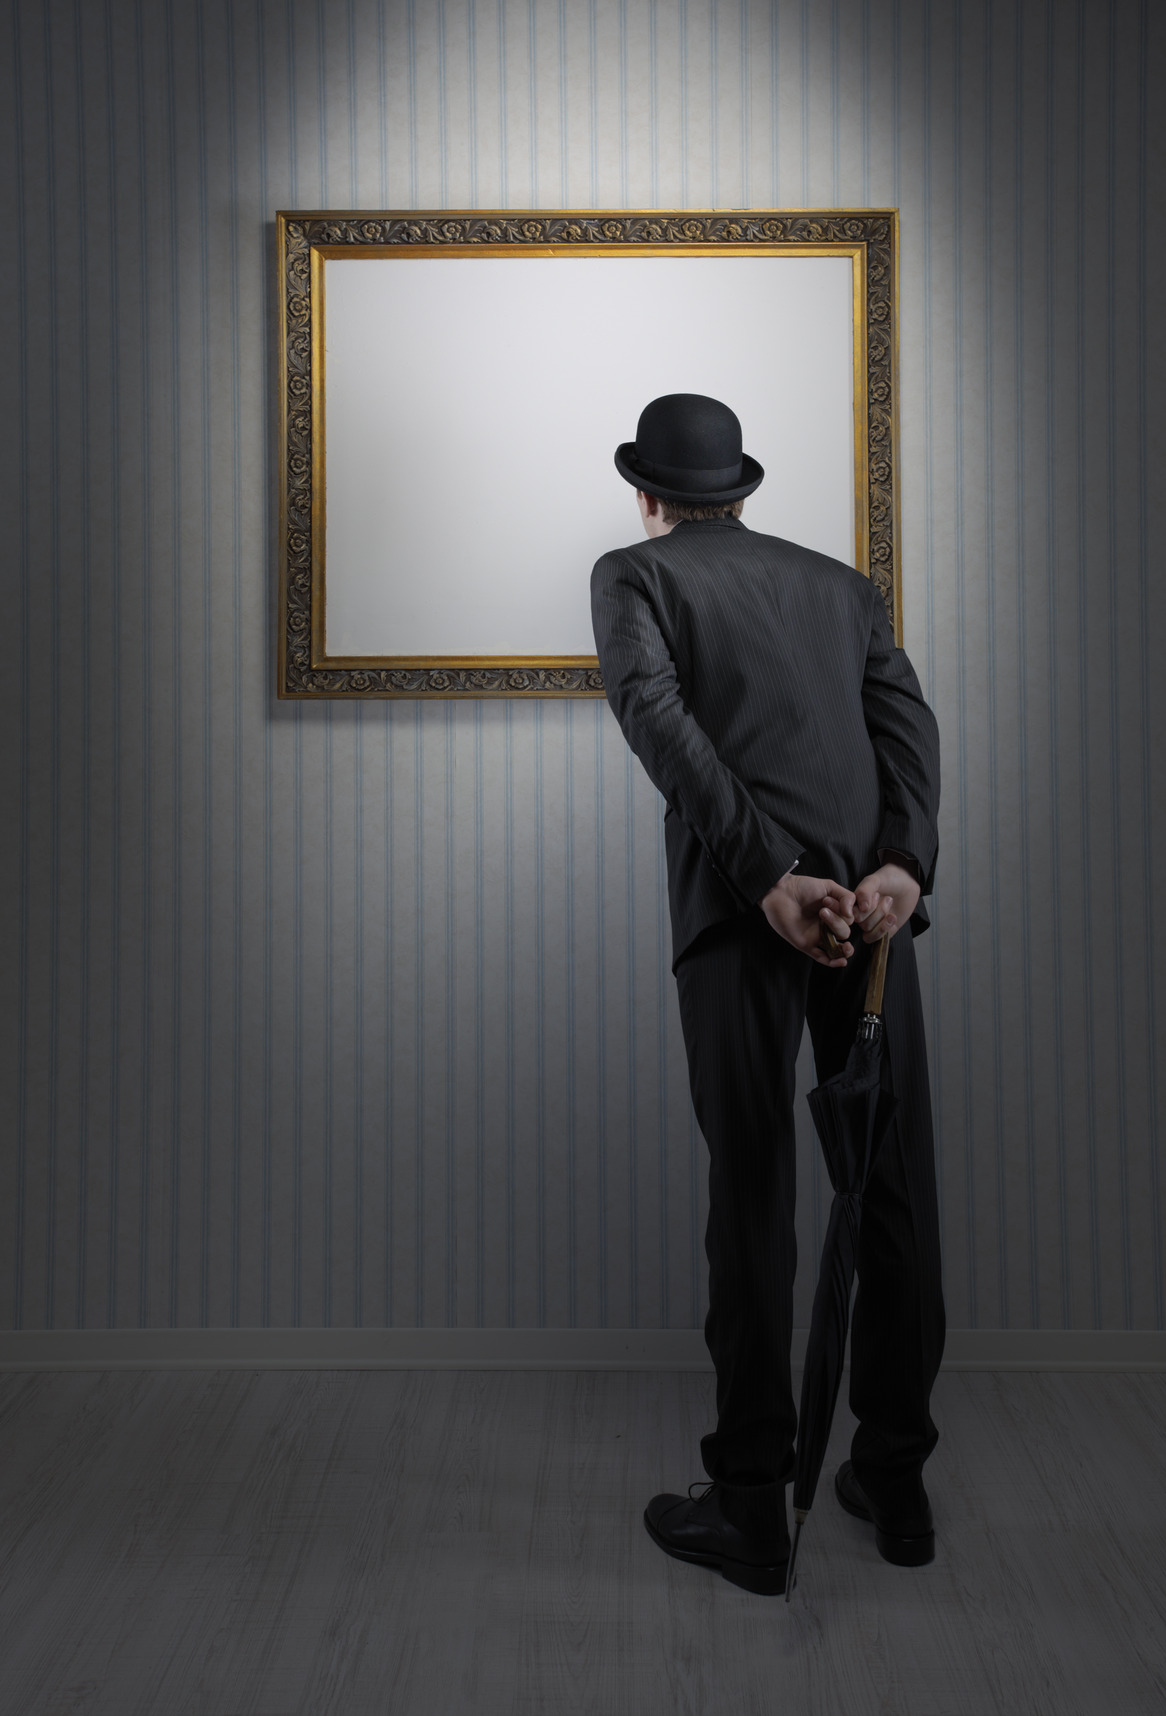 Retro elegant man standing and observing a empty frame in a museum